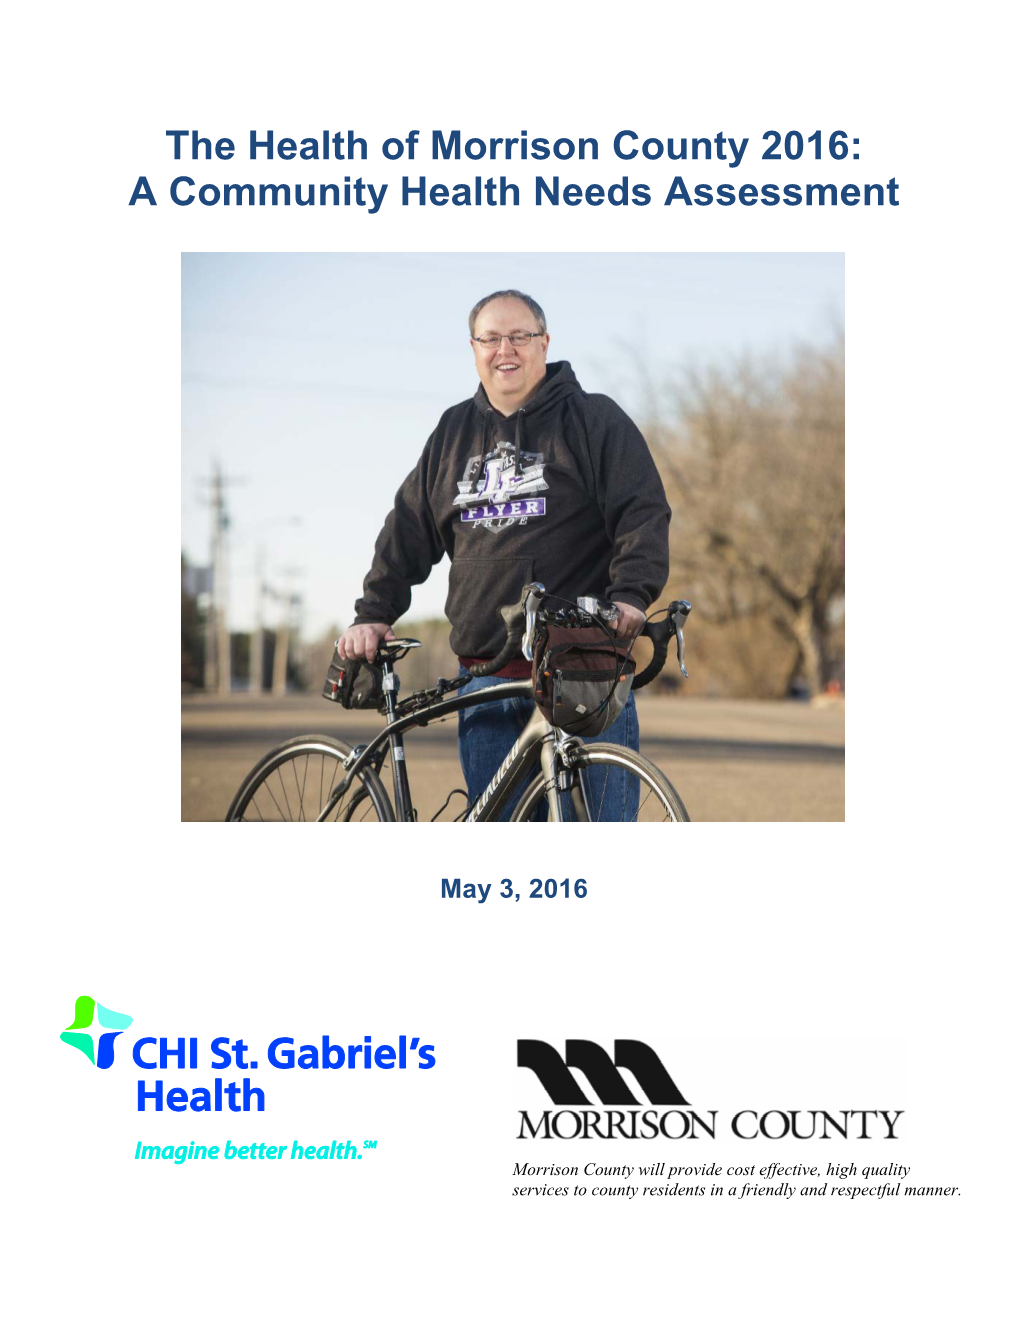 The Health of Morrison County 2016: a Community Health Needs Assessment